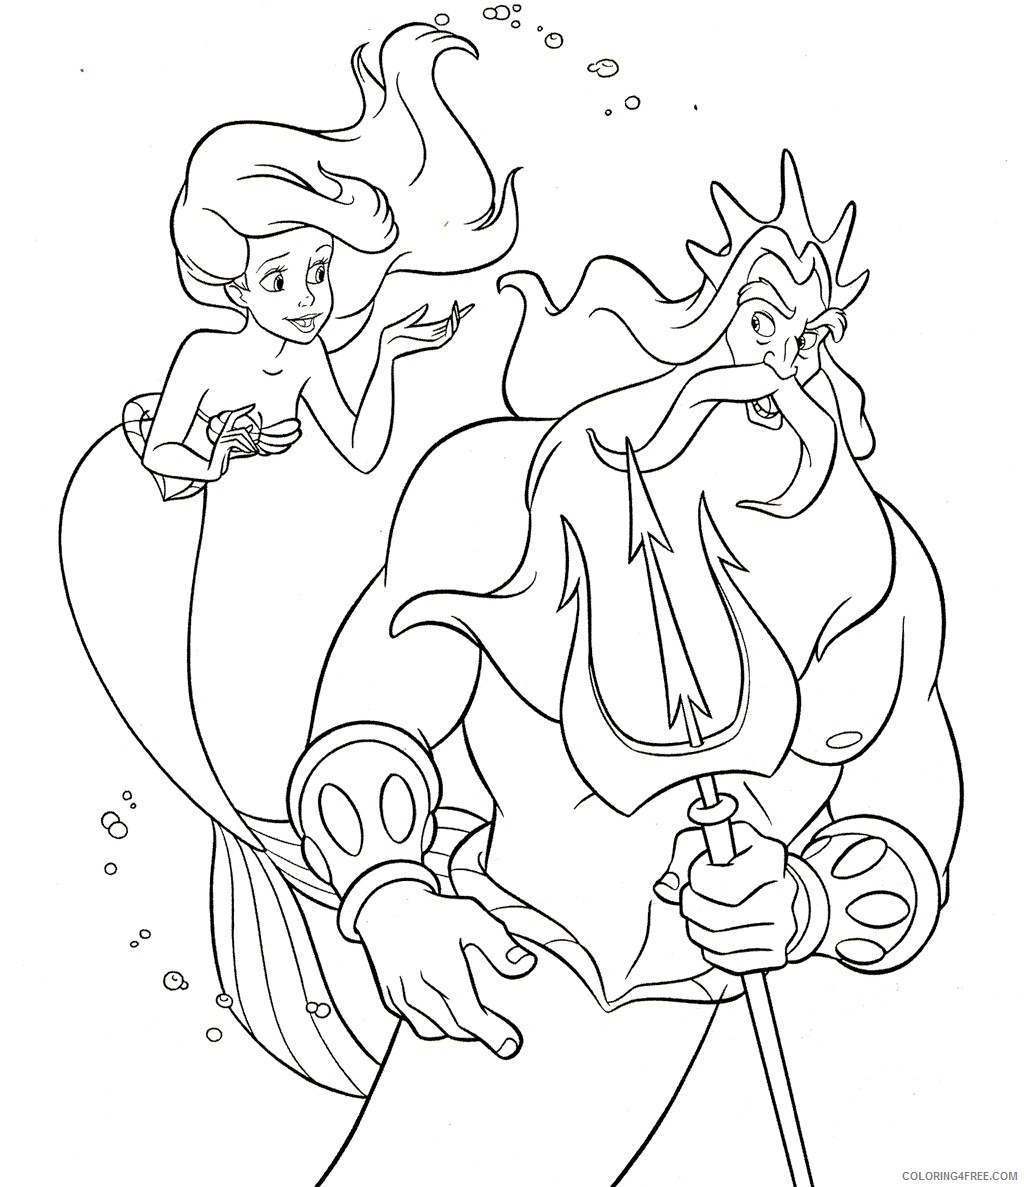 Ariel the Little Mermaid Coloring Pages Cartoons Ariel and King Triton Printable 2020 0547 Coloring4free